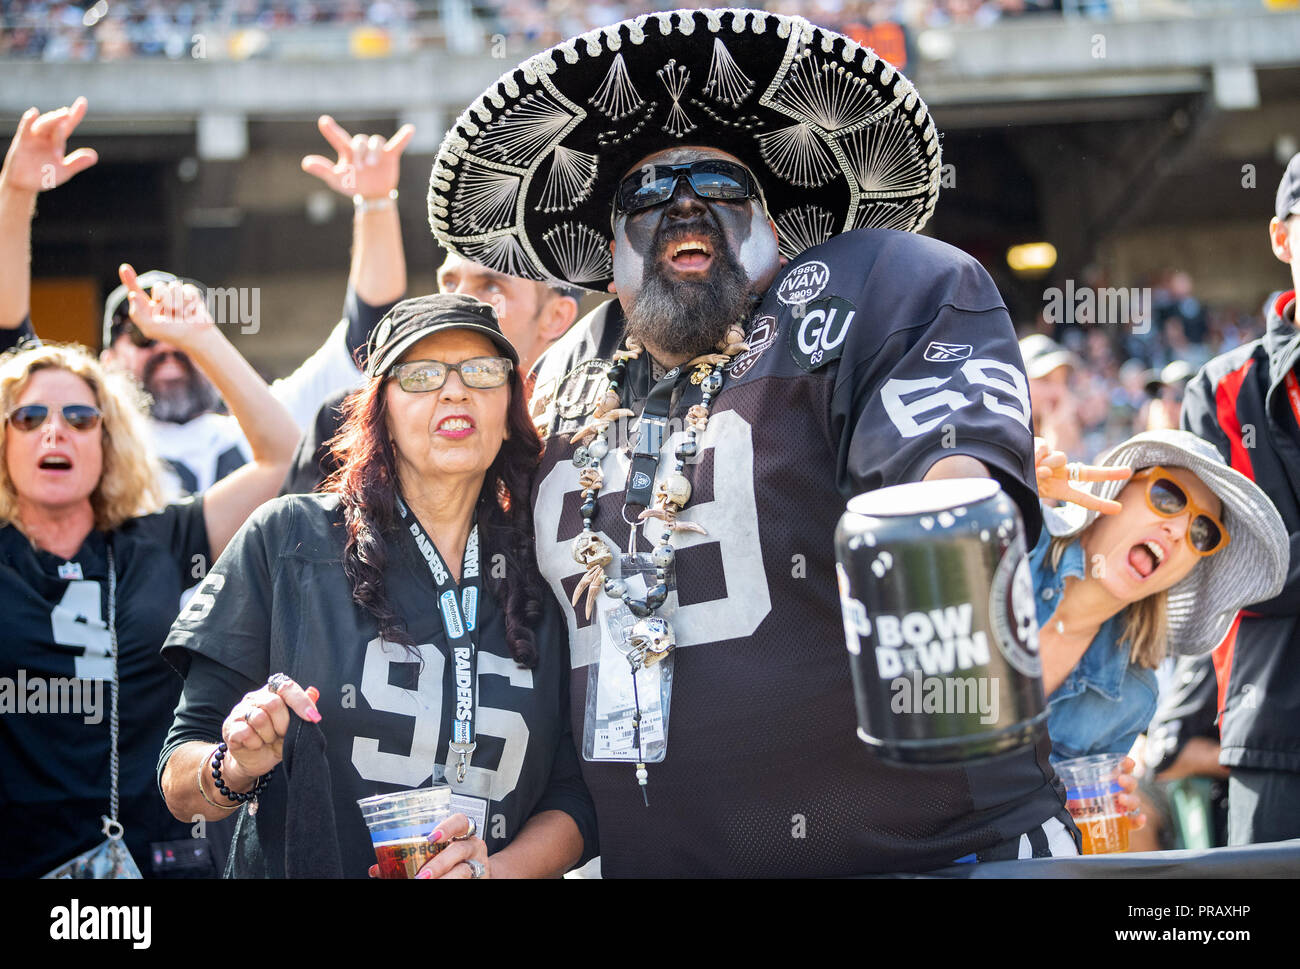 Oakland, California, USA. 30th Sep, 2018. Raider fans cheer on the team, during a NFL game between the Cleveland Browns and the Oakland Raiders at the Oakland Coliseum in Oakland, California. Valerie Shoaps/CSM/Alamy Live News Stock Photo